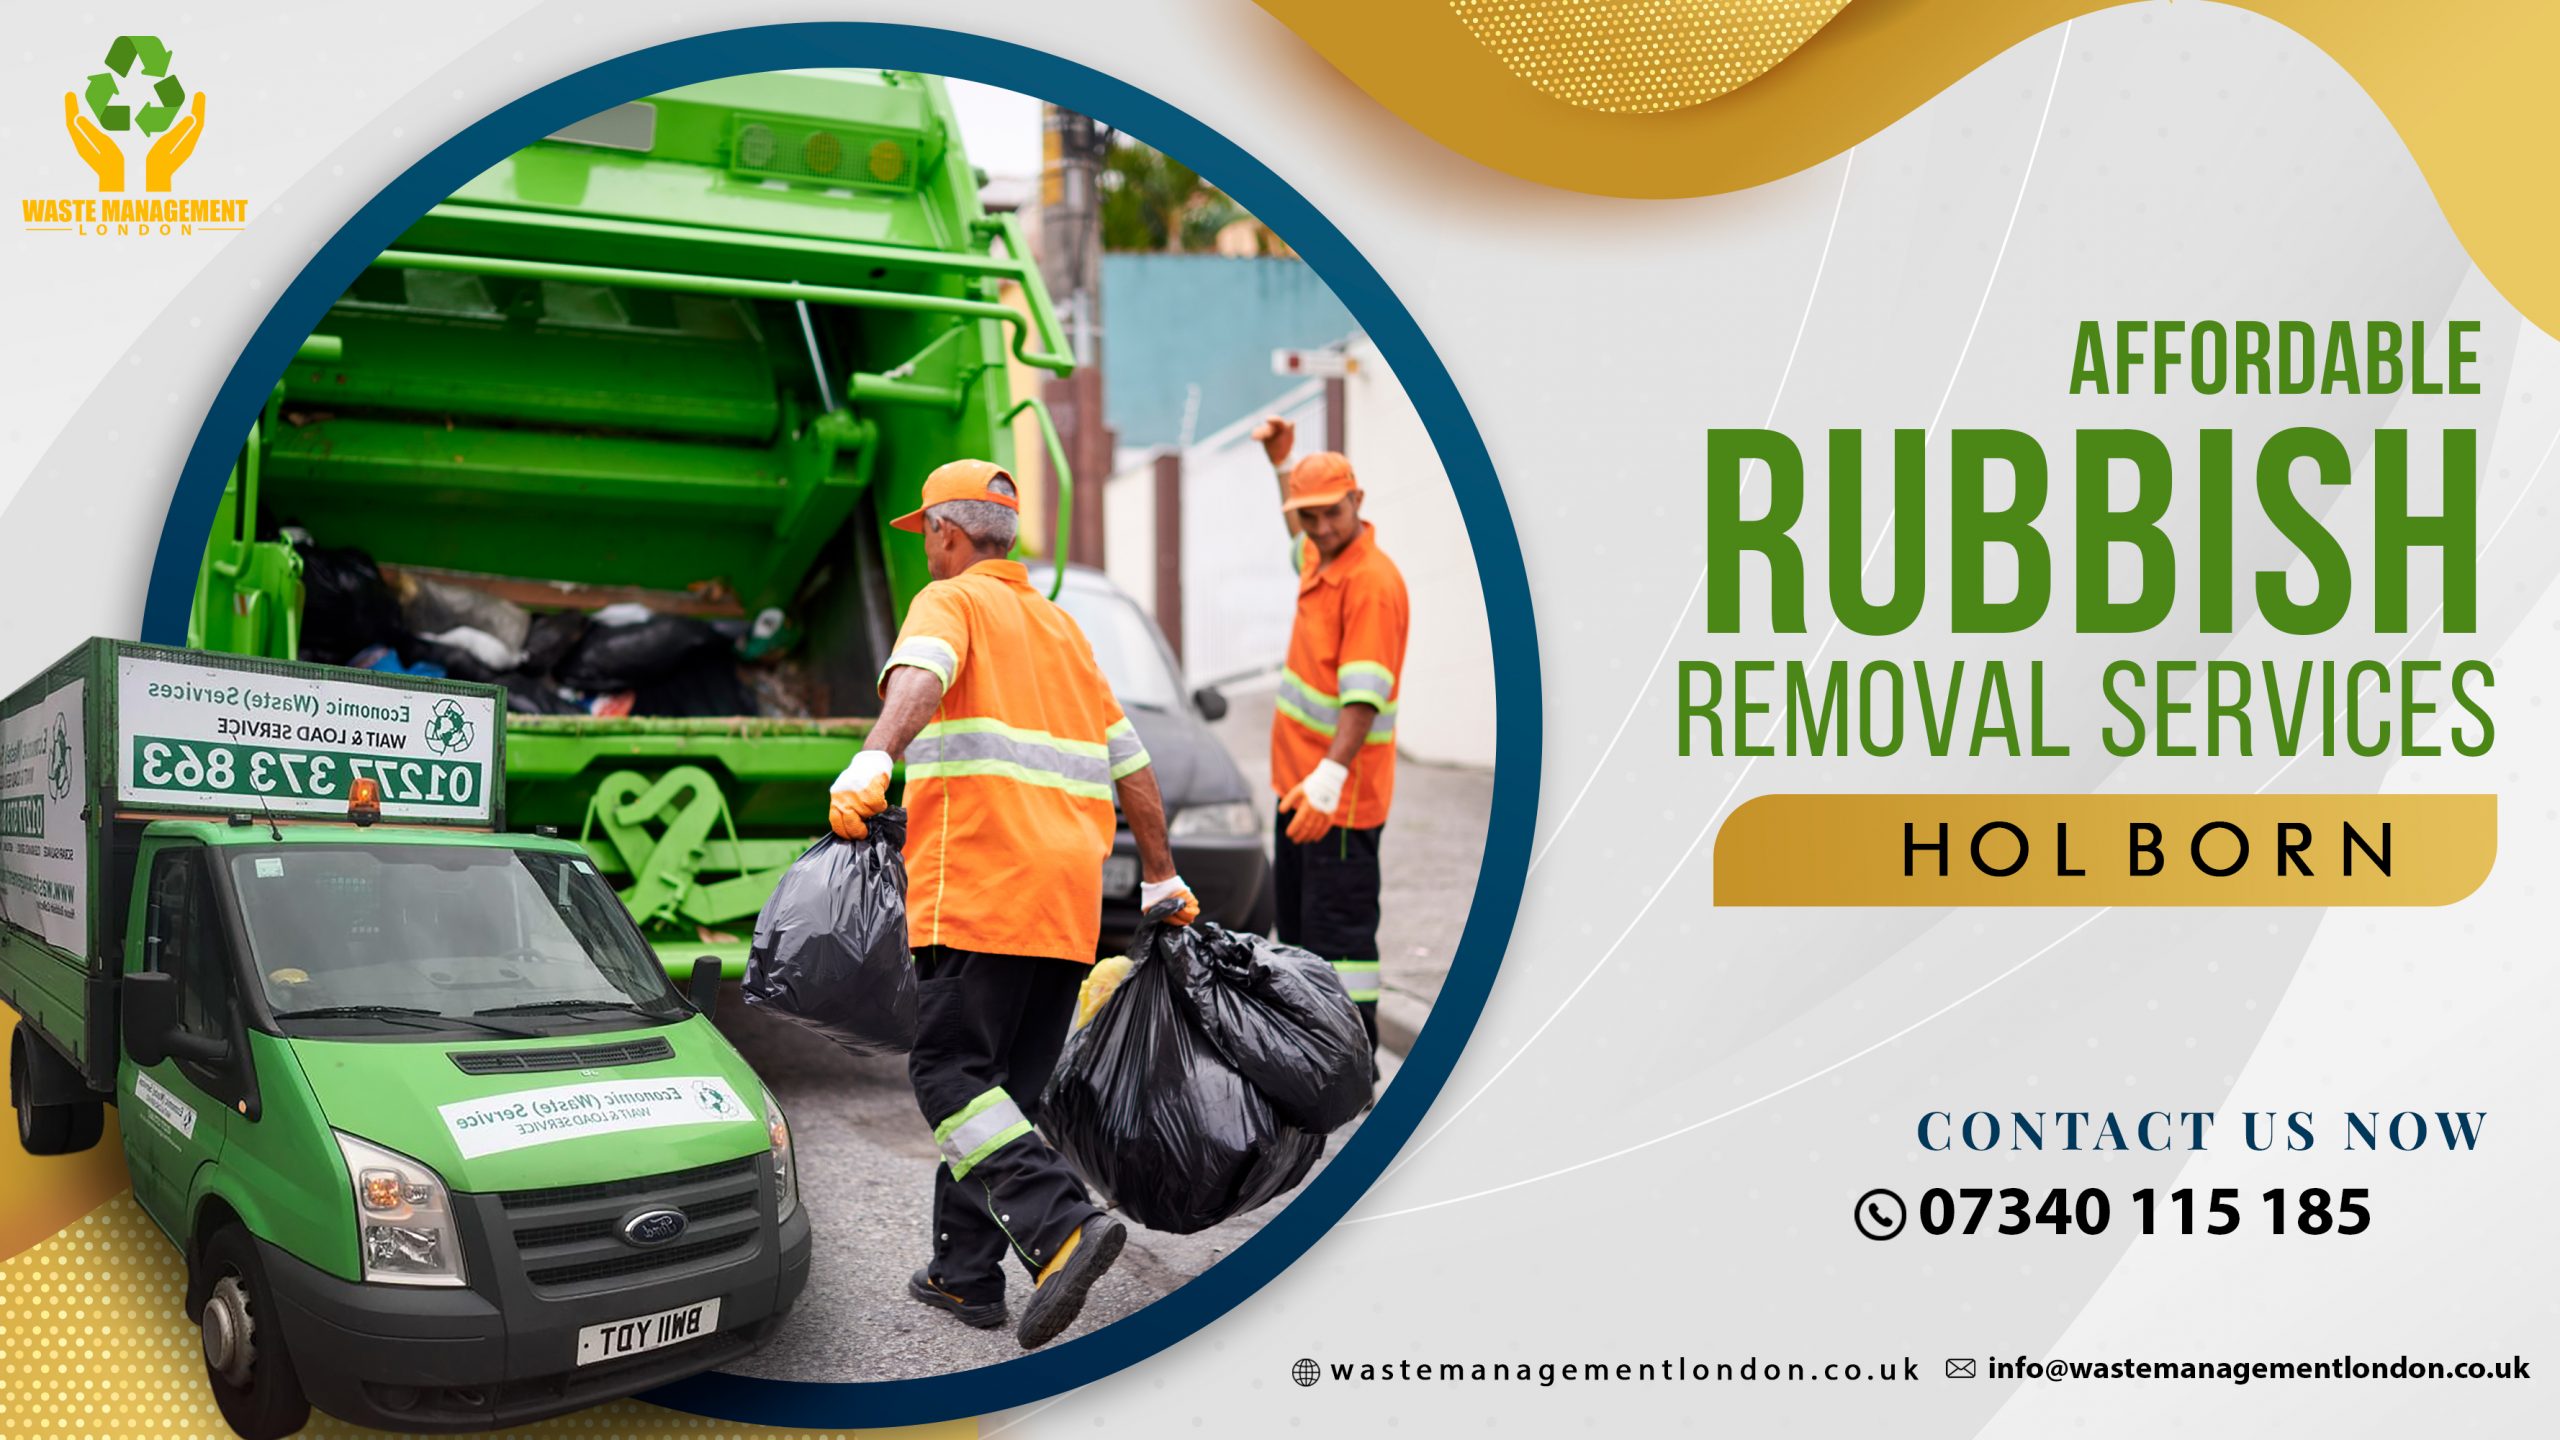 Affordable Rubbish Removal services Holborn